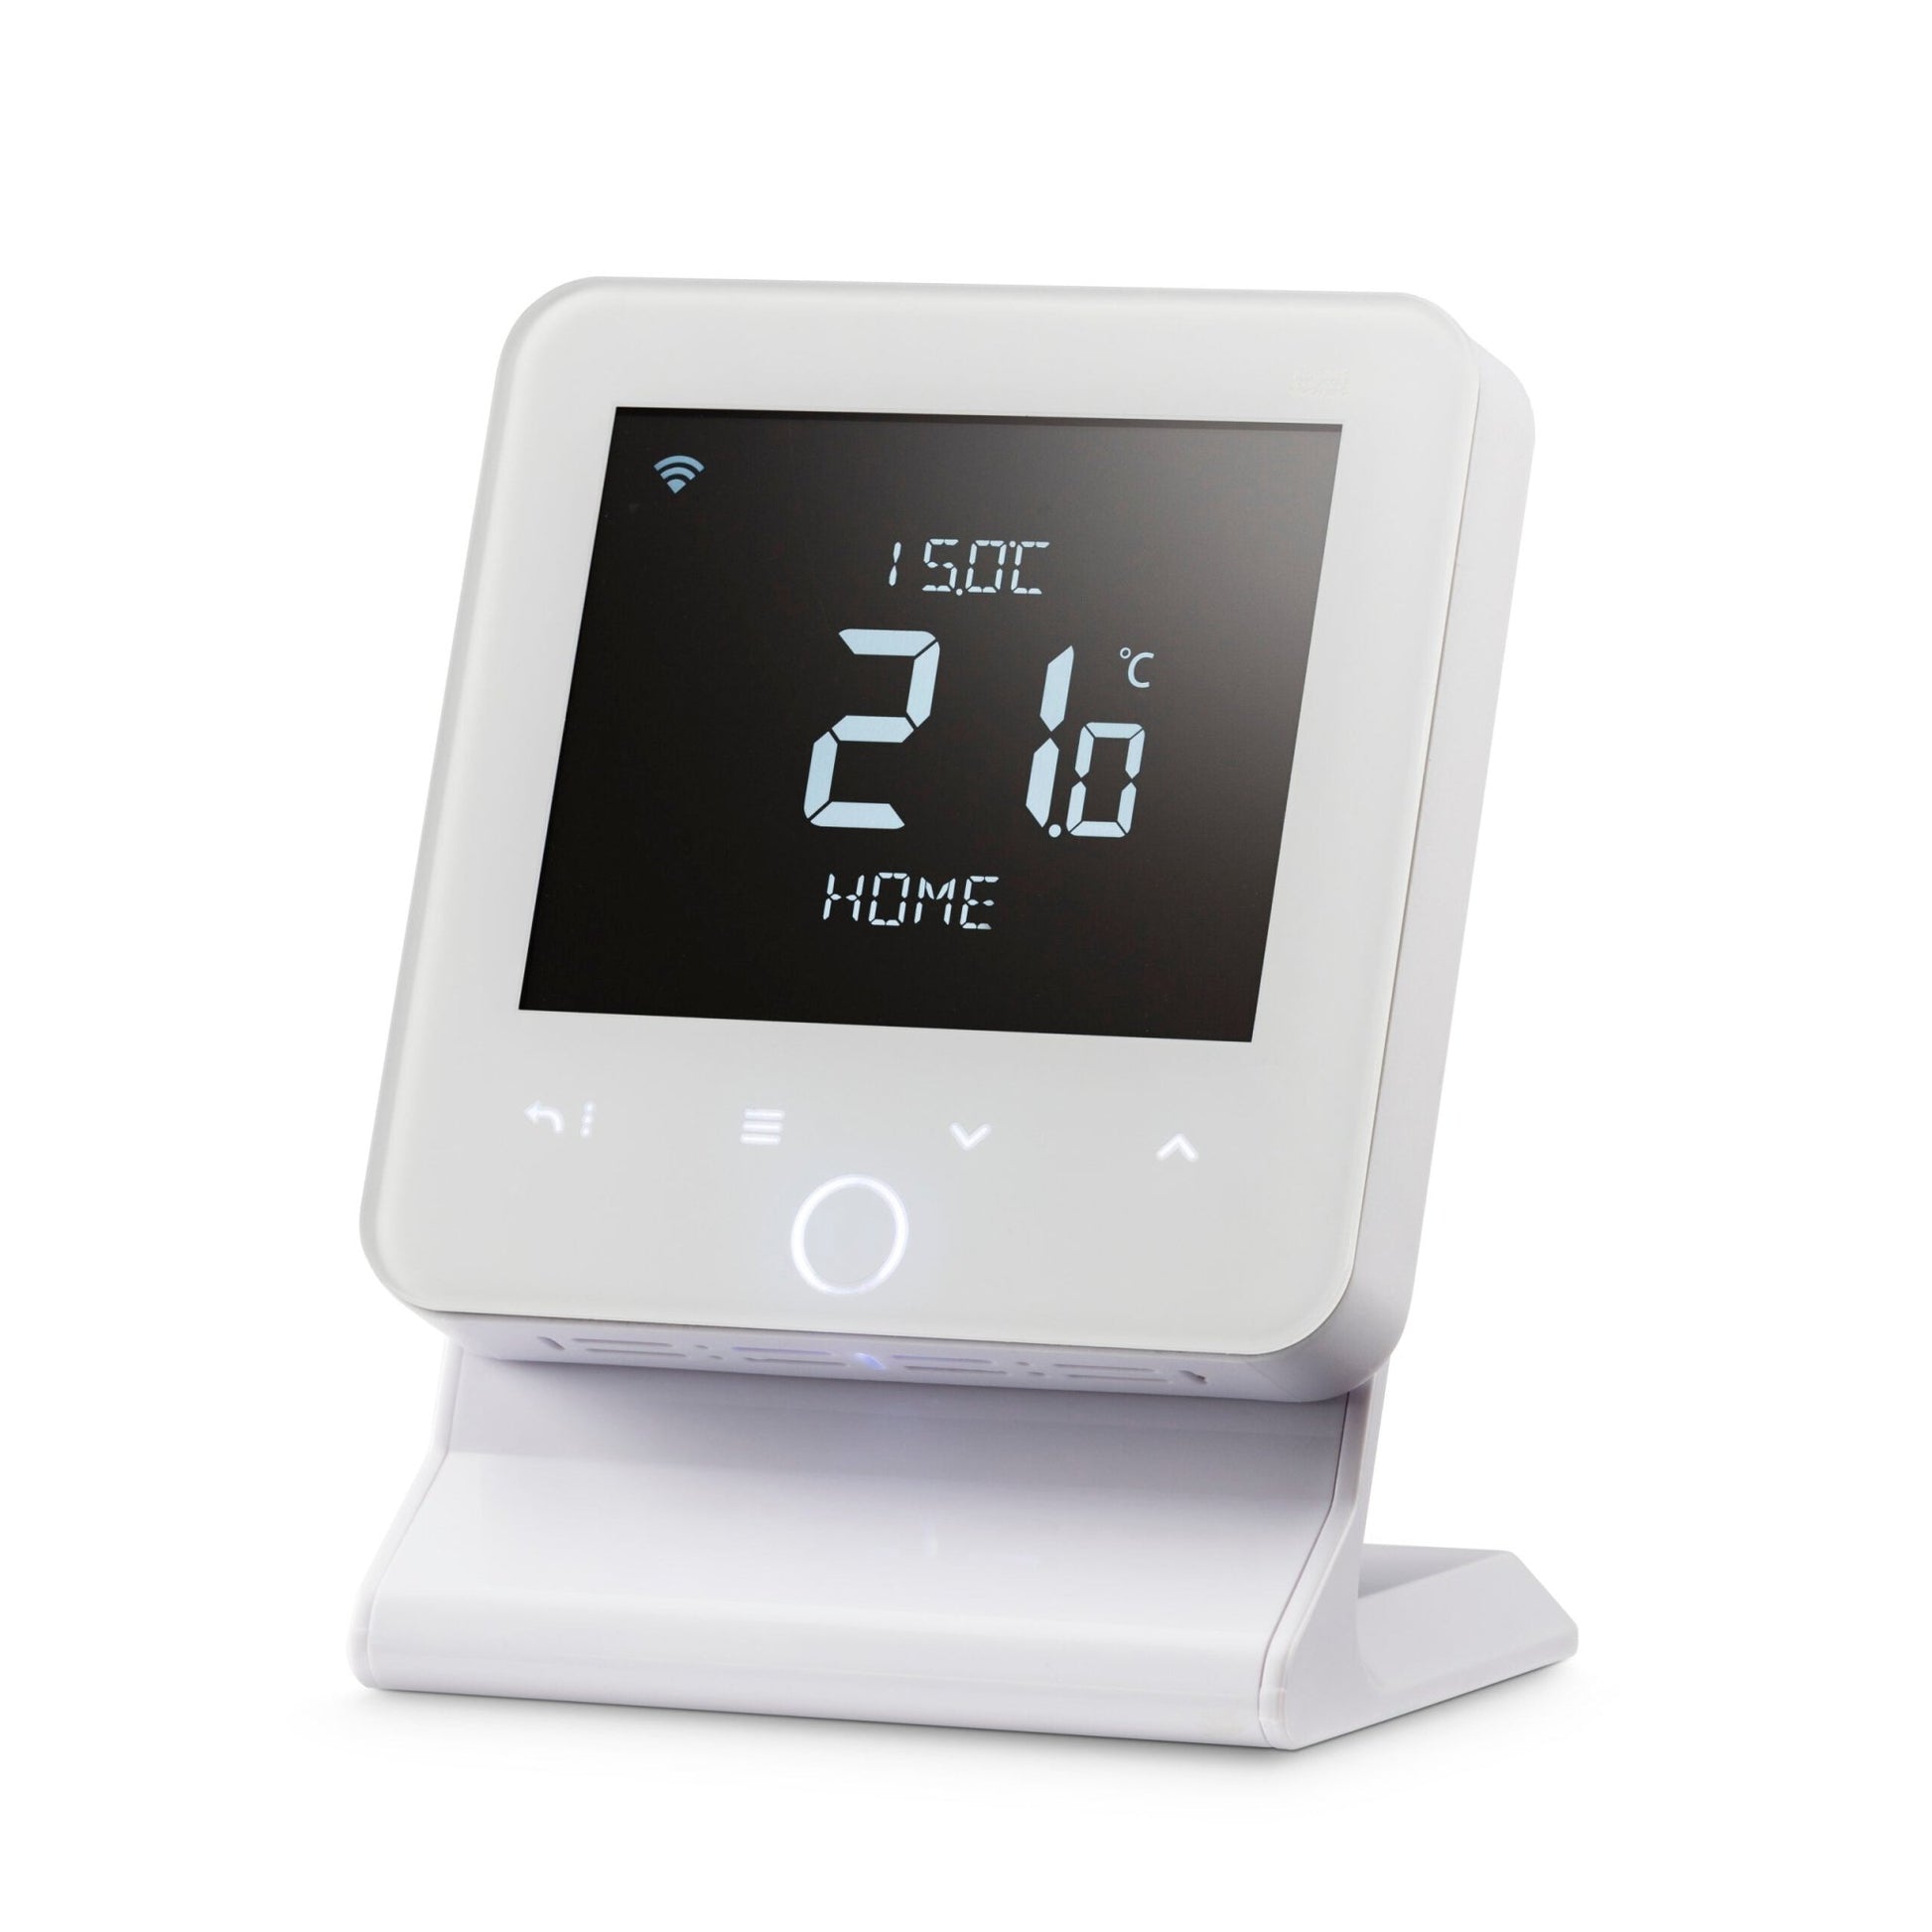 ESI - Energy Saving Innovation Controls - ESRTP6WHW - Series 6 - WIFI Wireless Programmable Room Thermostat Heating and Hot Water Control - Thermostat, Receiver and Stand - UFH Parts & Design Ltd